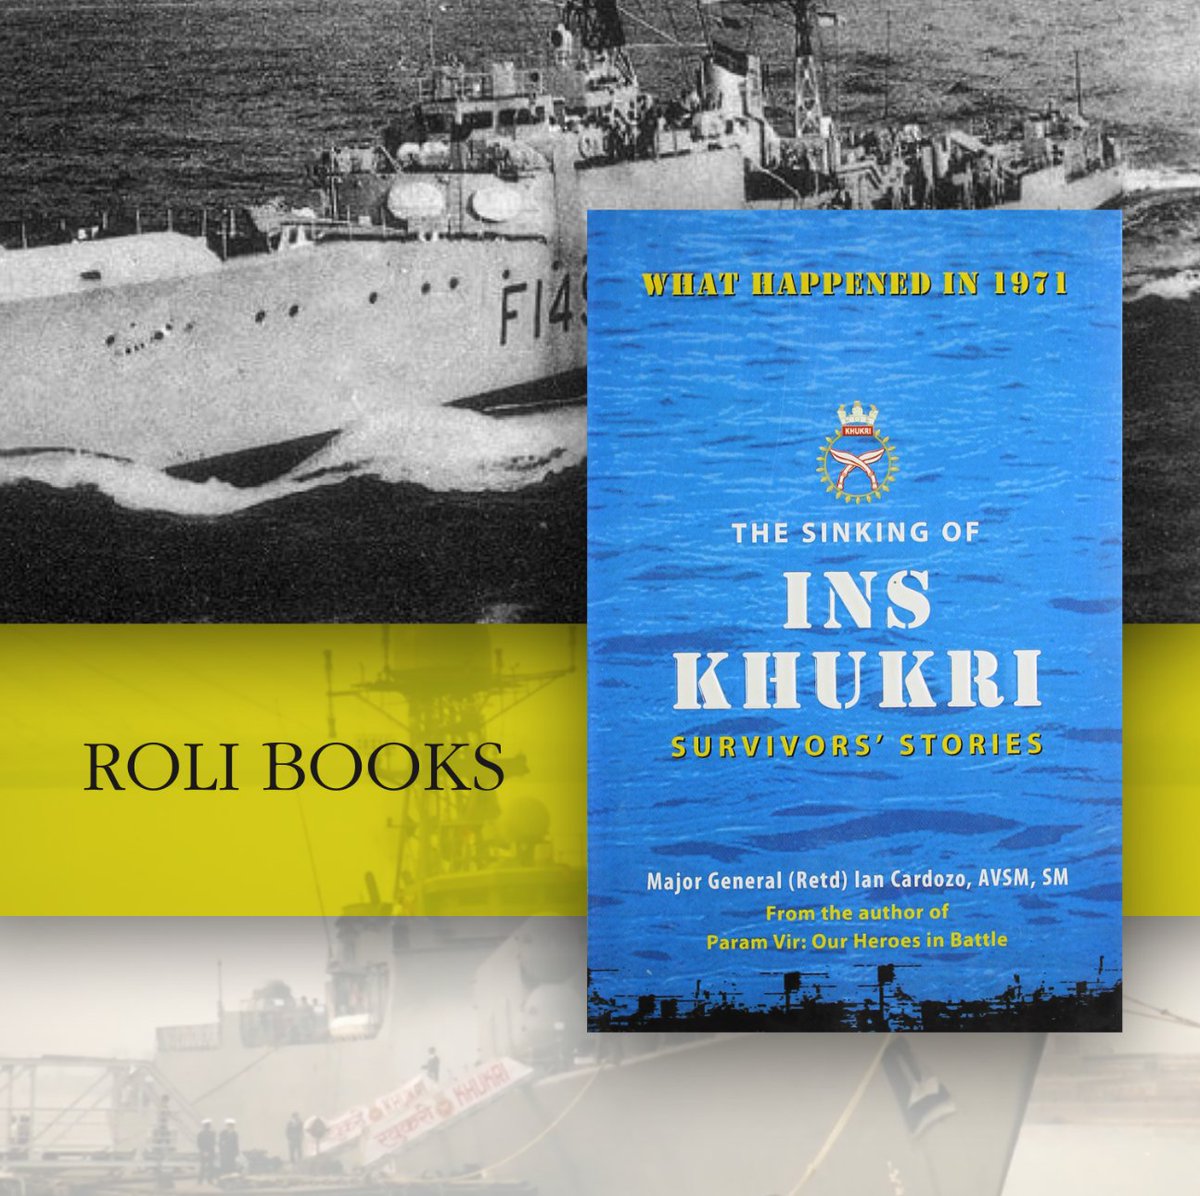 On this day in 1971, INS Khukri was torpedoed and it sank along with 178 sailors and 18 officers.

In the annals of war writing, General Cardozo humanizes this cataclysmic event like never before.

#INSKhukri 
#believeinbooks